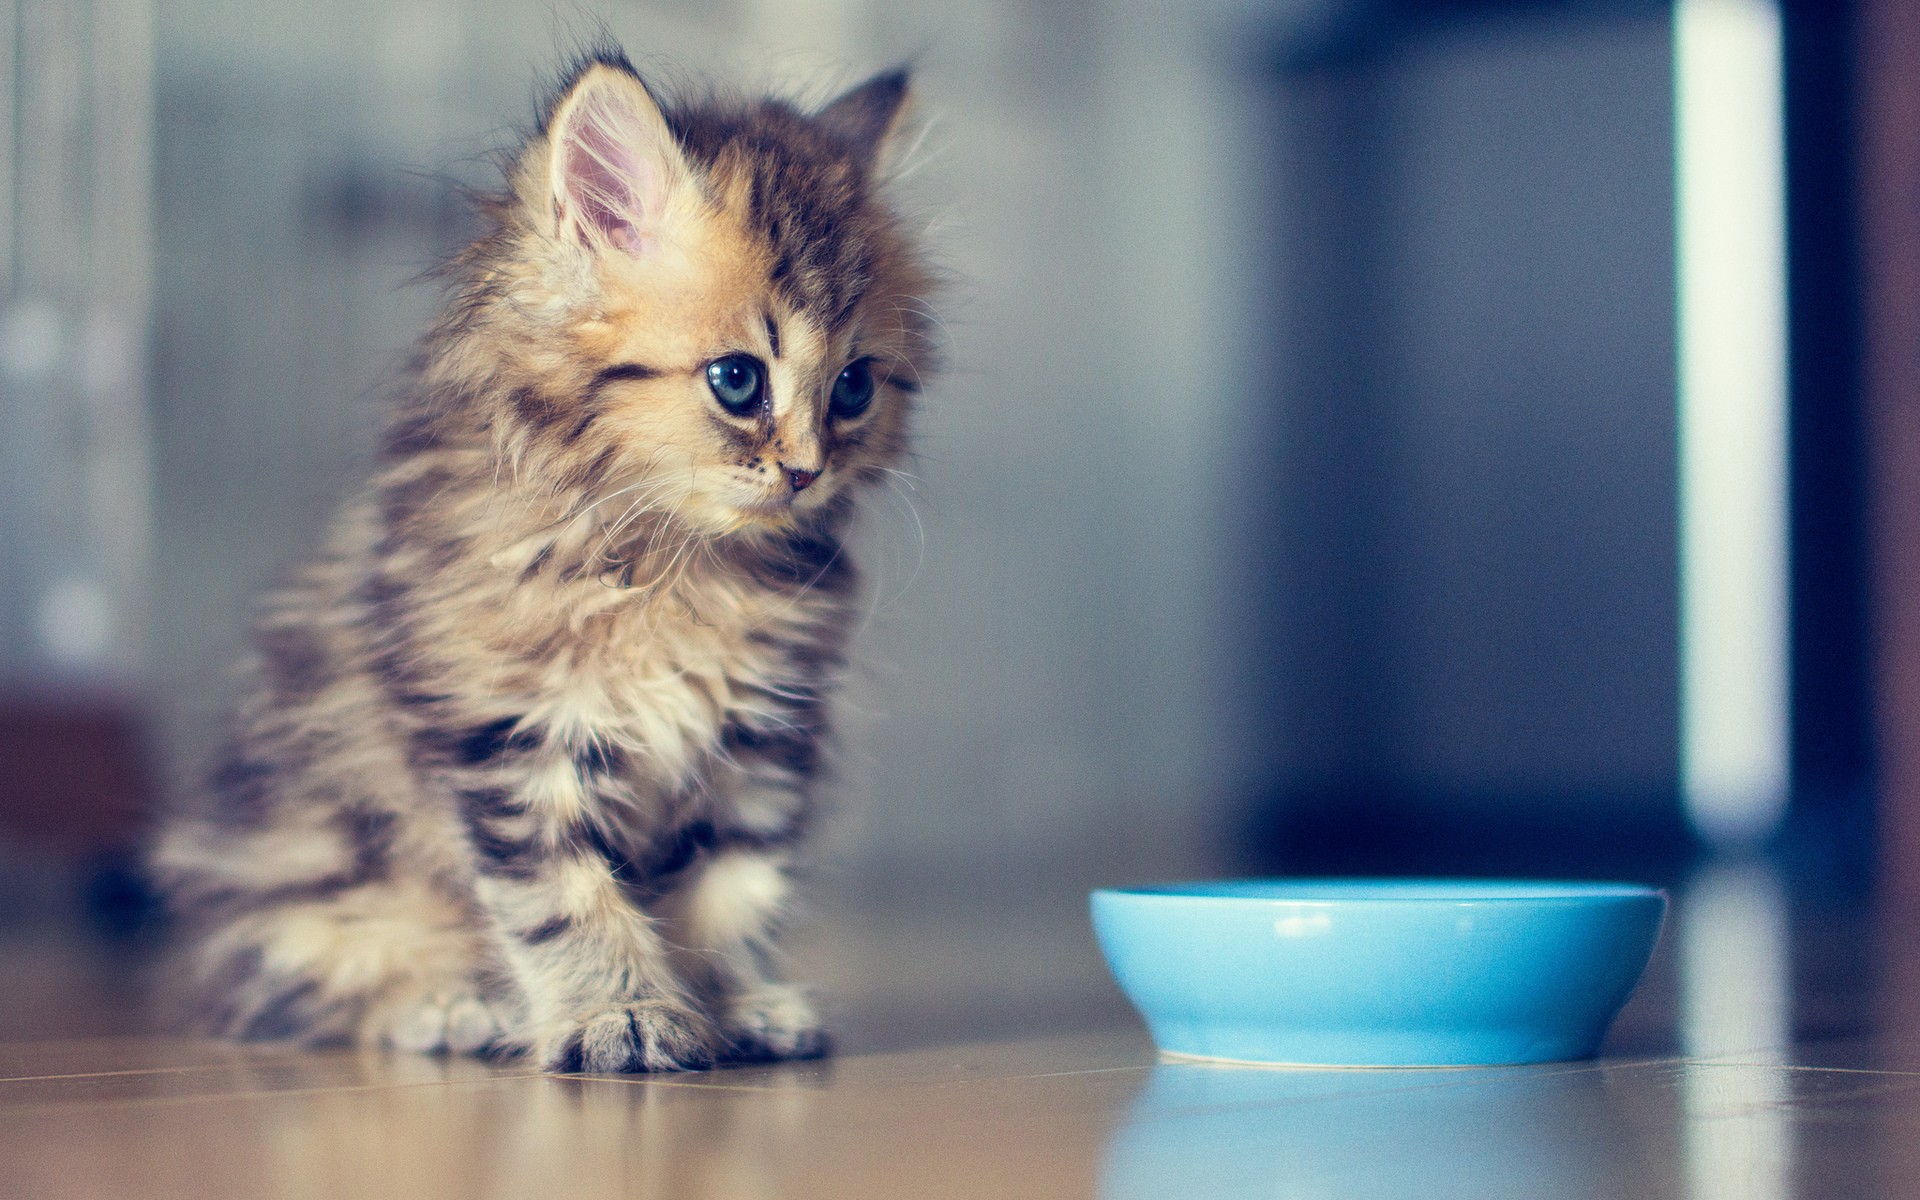 caturday pic of a kitten waiting to be fed